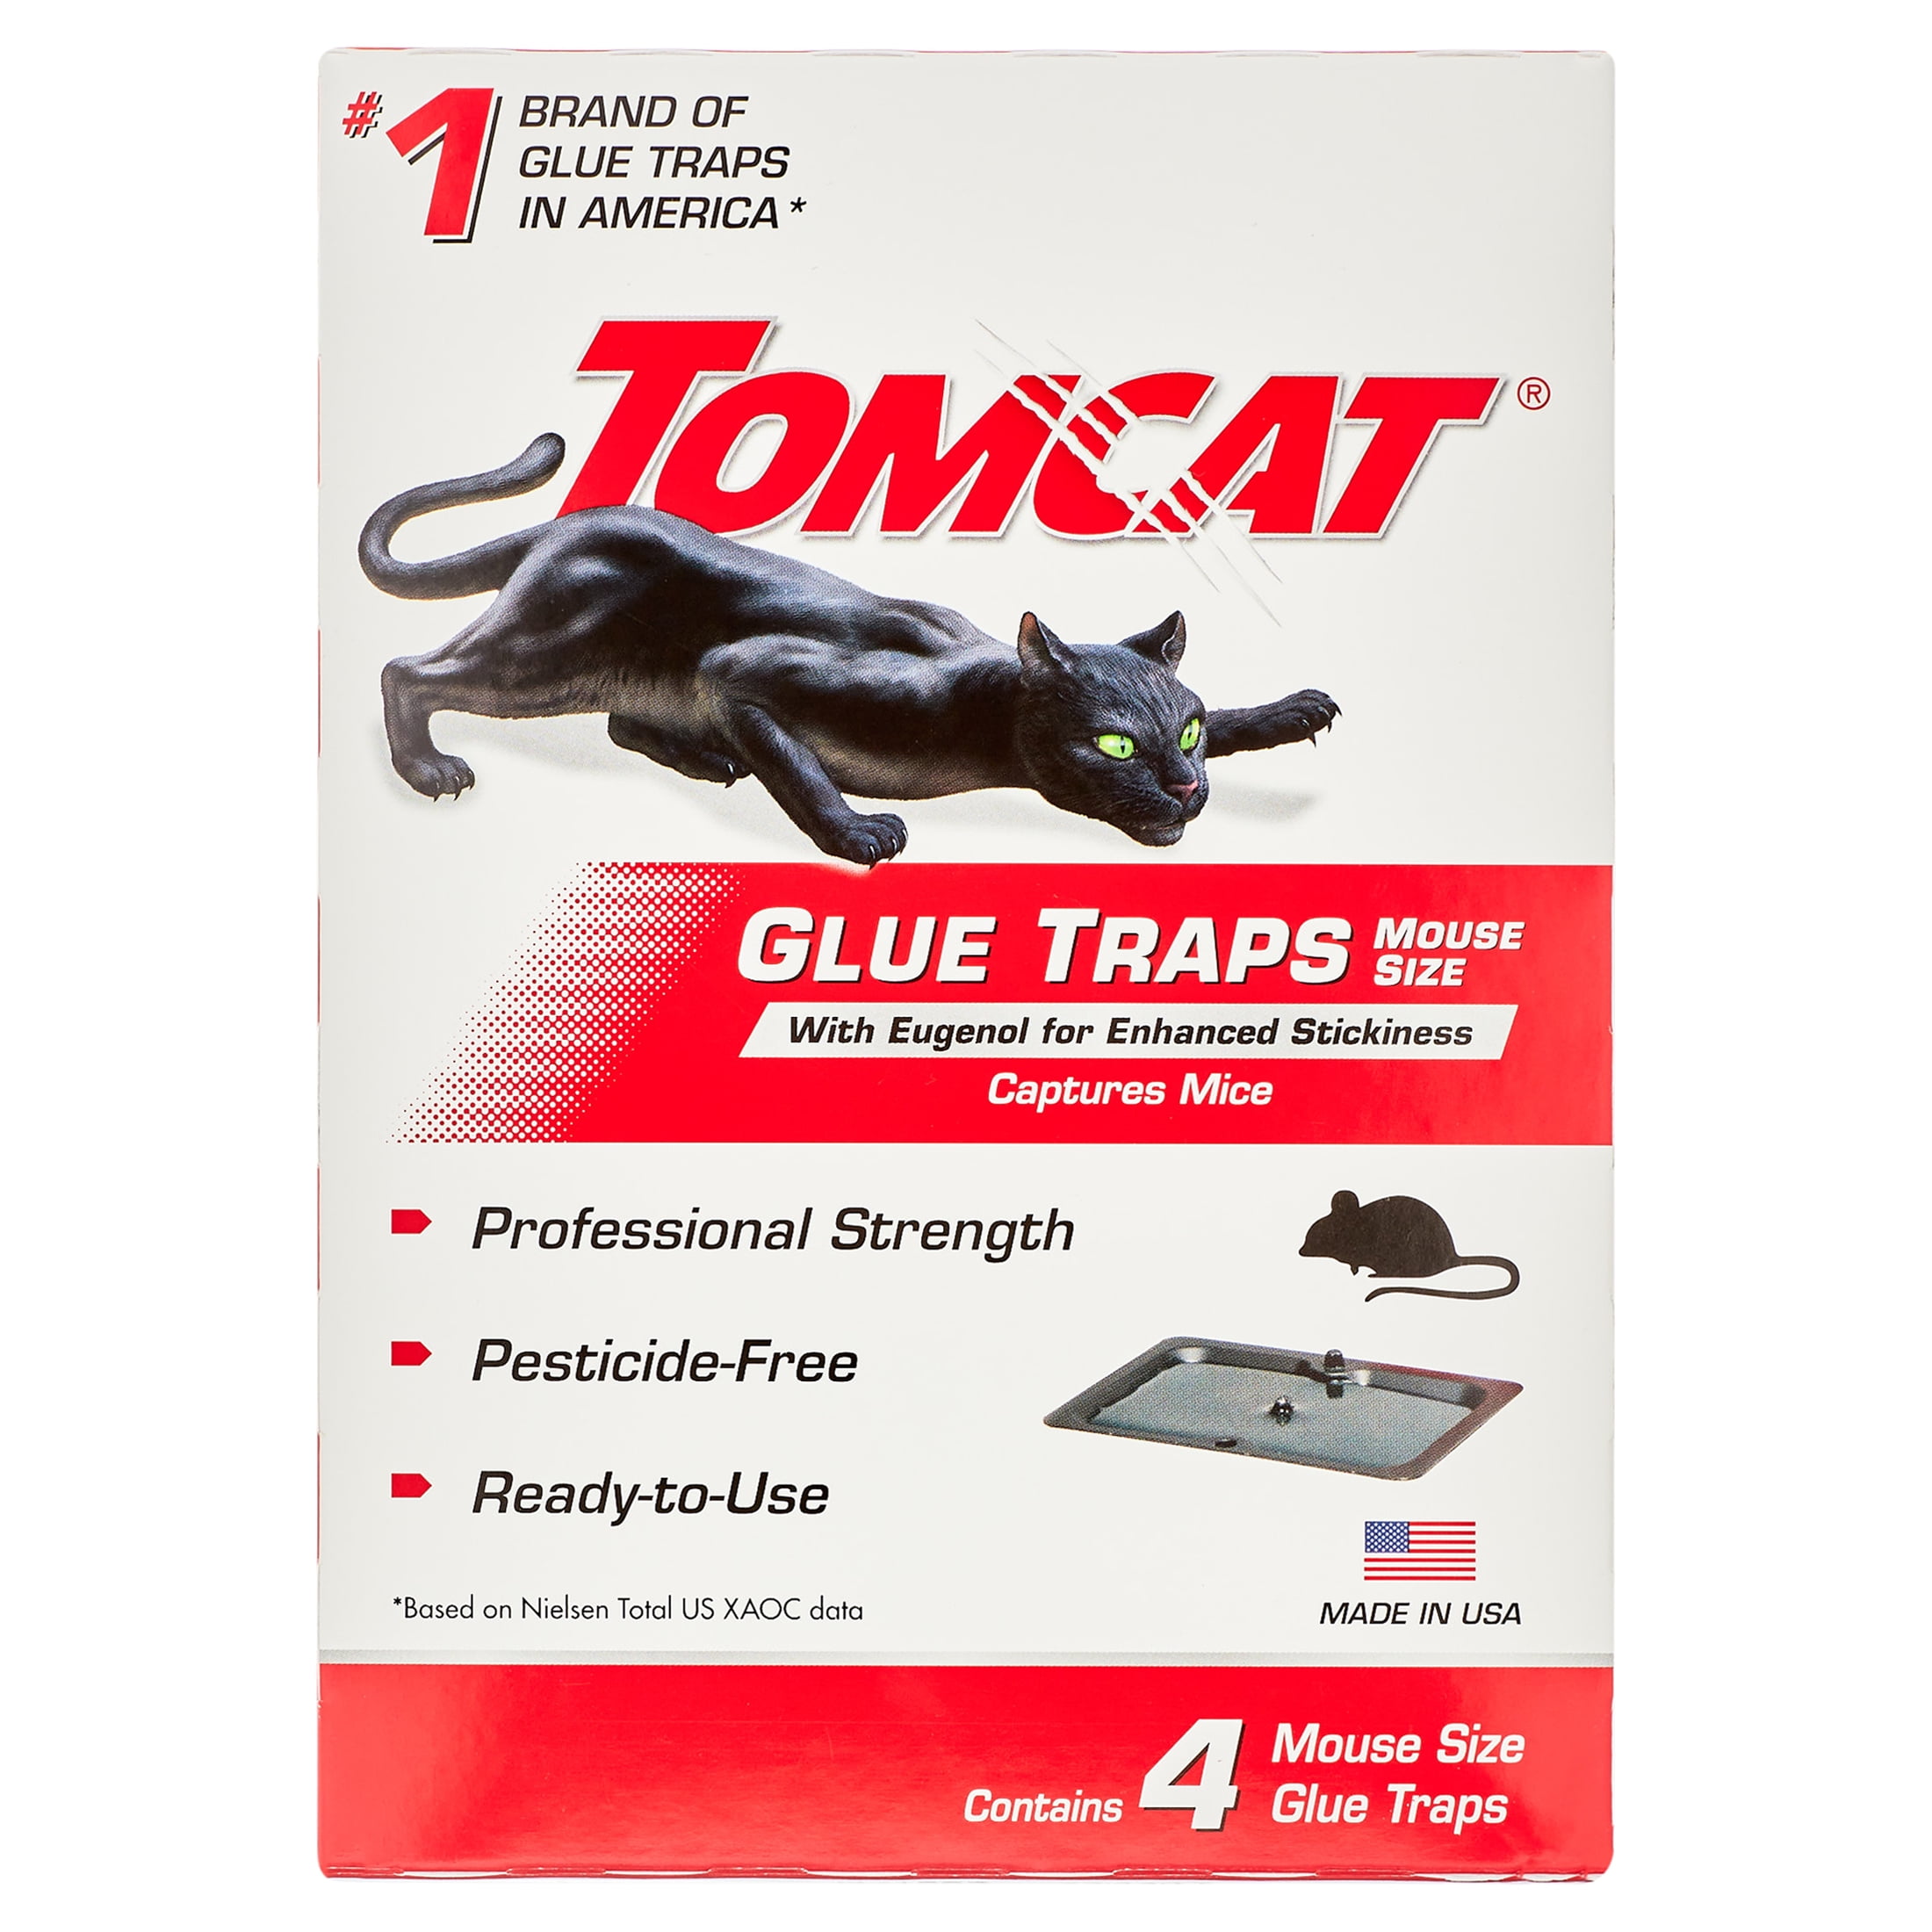 Protecker Mouse Trap,Pest Control Traps,Professional Strength Mouse Glue Traps ,Mice Rat Moths Bugs Insects Bed Bugs Spiders Cockroaches Snake Glue